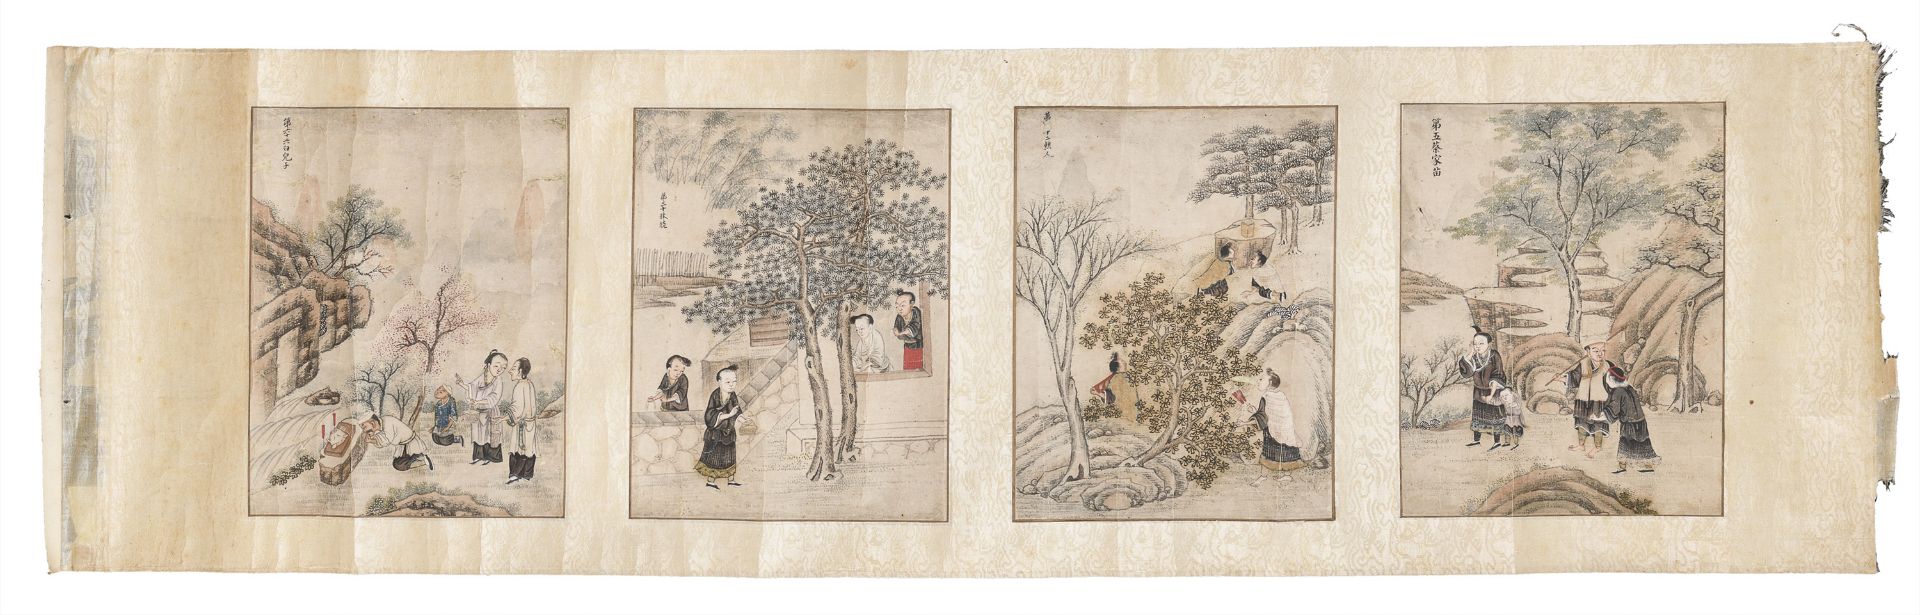 CHINESE MIXED MEDIA PAINTING EARLY 20TH CENTURY